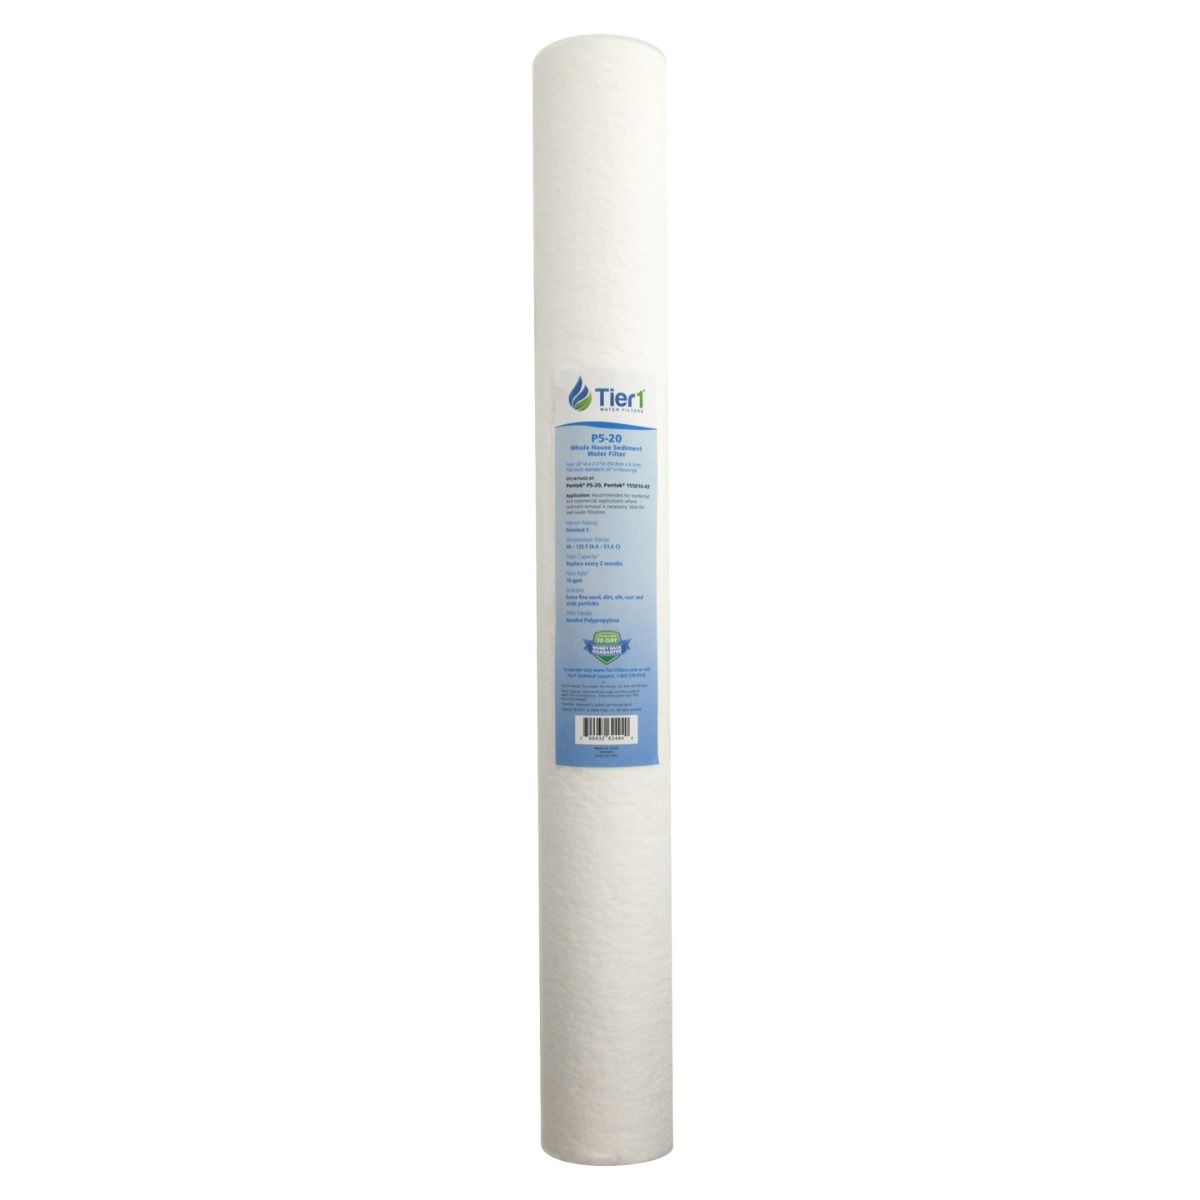 20 X 2.5 Polypropylene Replacement Filter by Tier1 (5 micron)